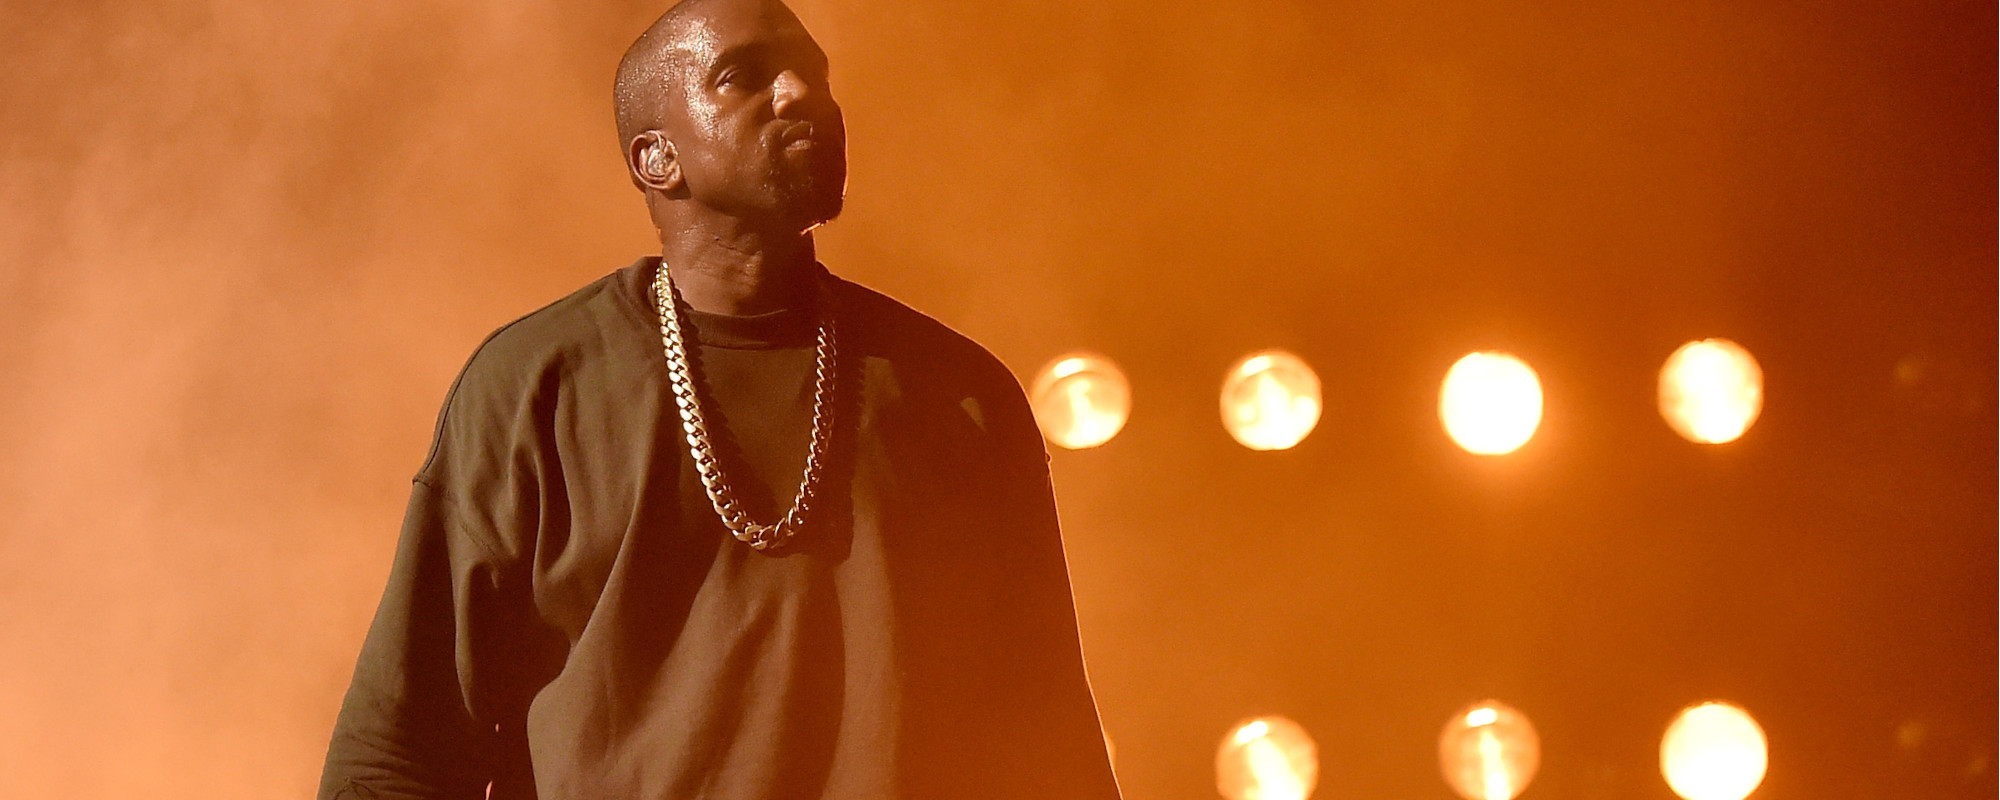 Spotify Removes Kanye West, Ty Dolla $ign Track Over Alleged Copy Right Infringement